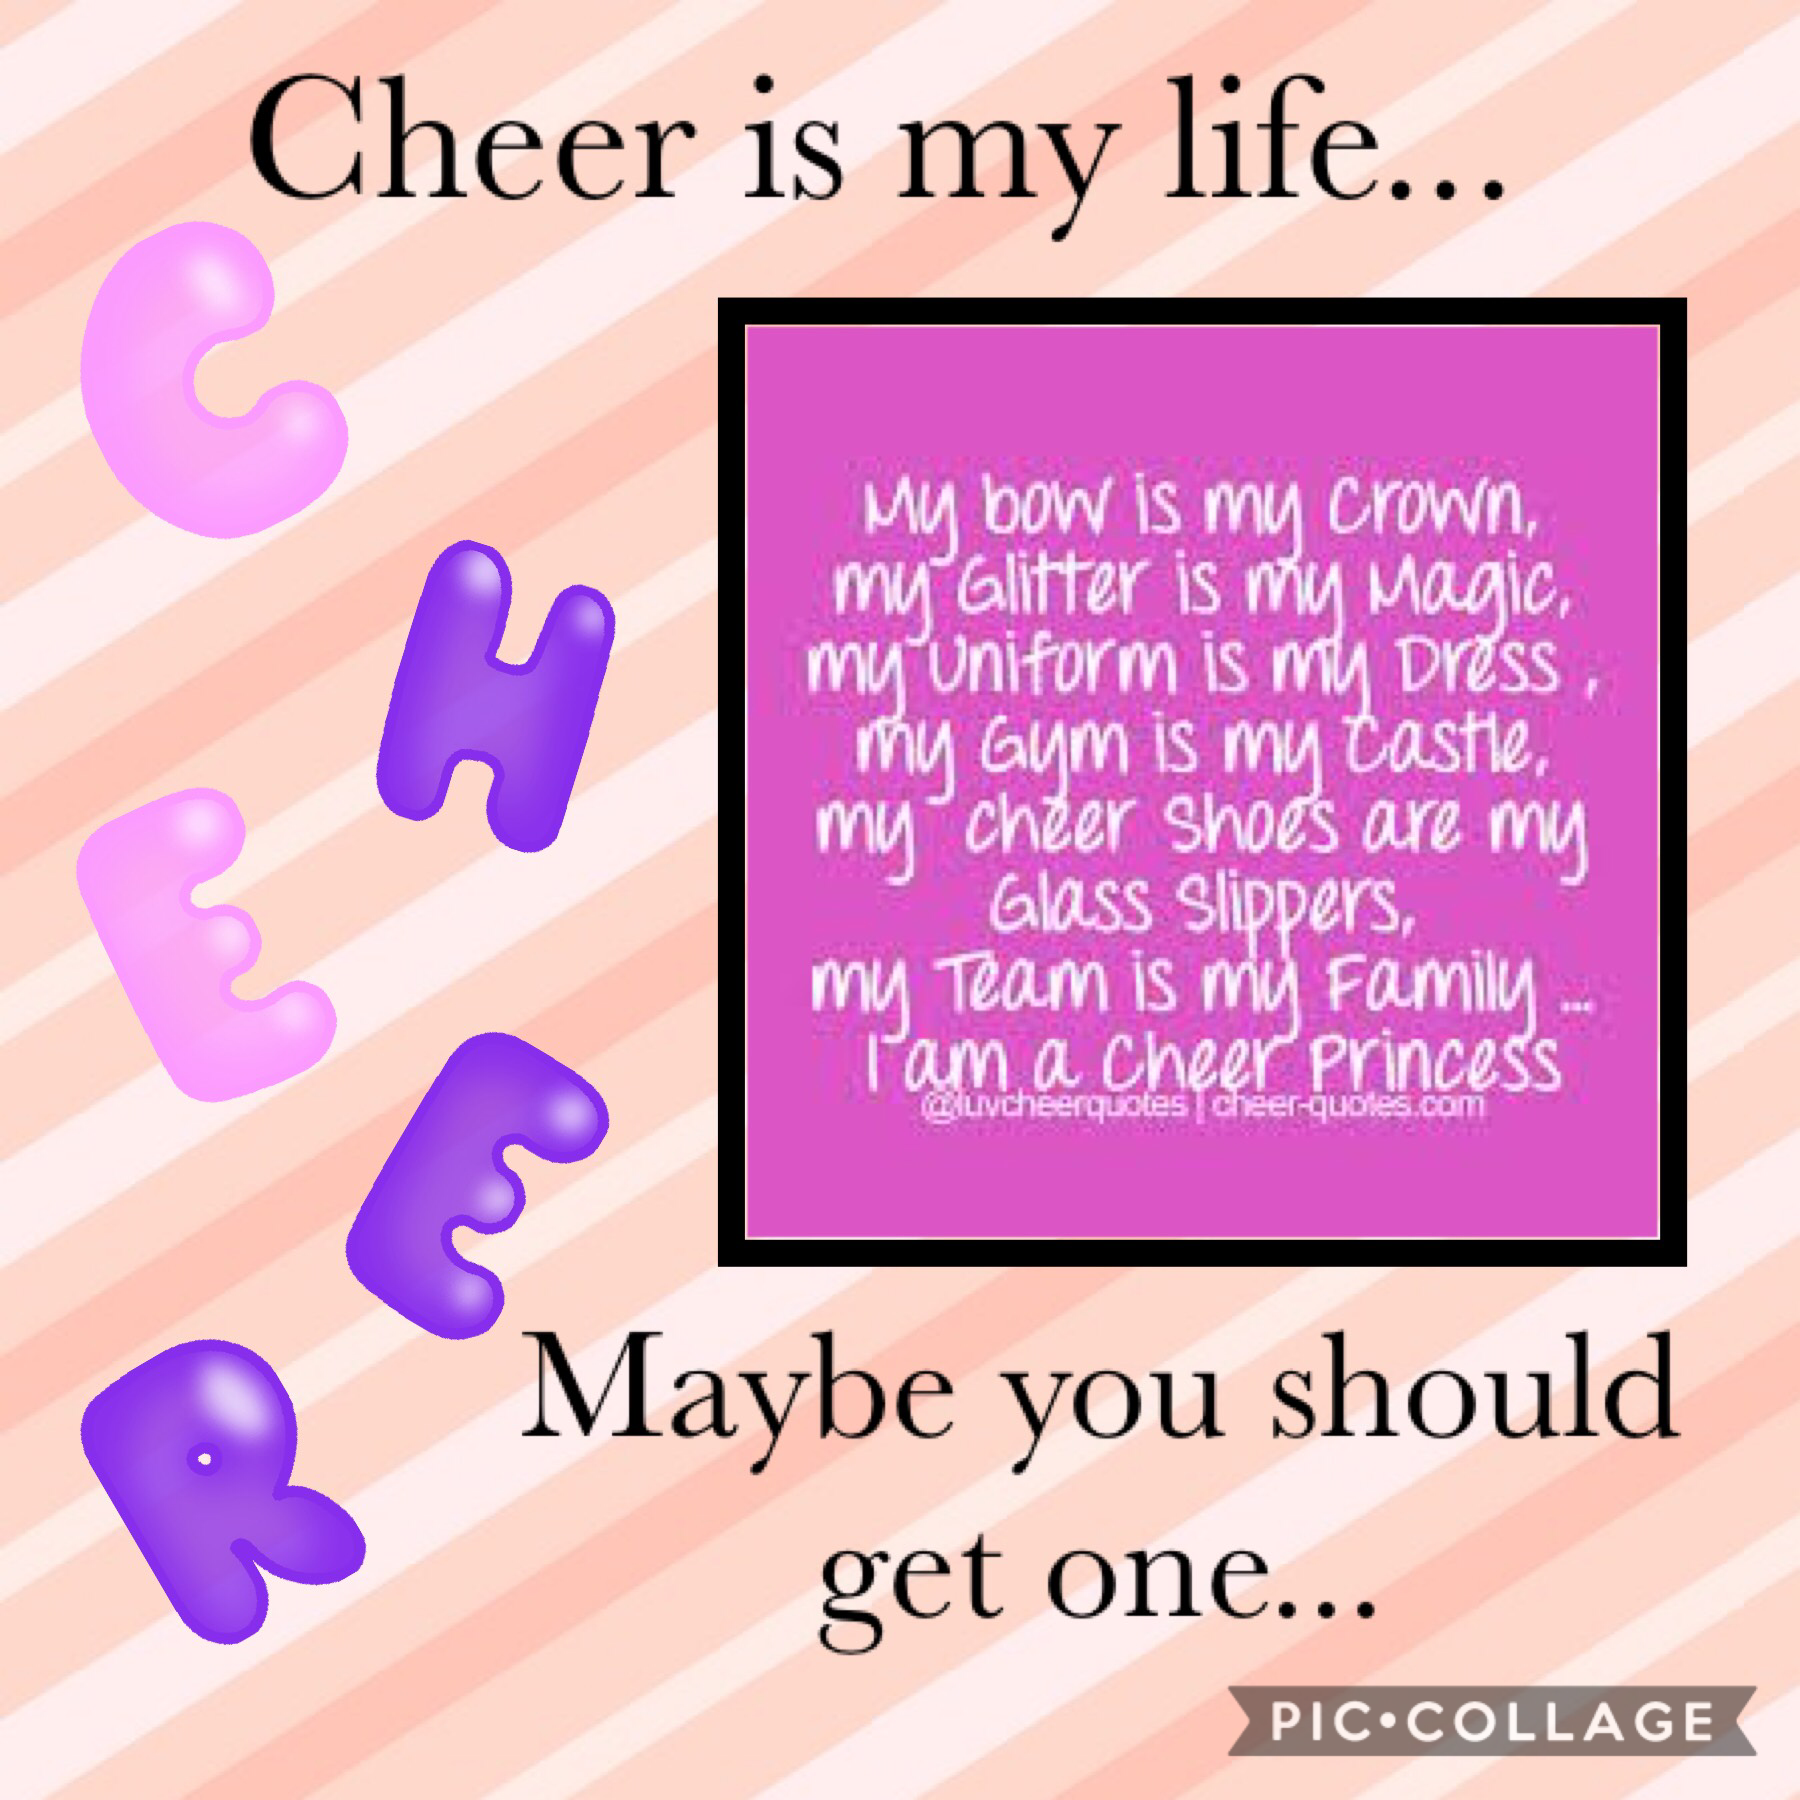 I had fun with this but I am being serious cheer is my life!!😊😊😊